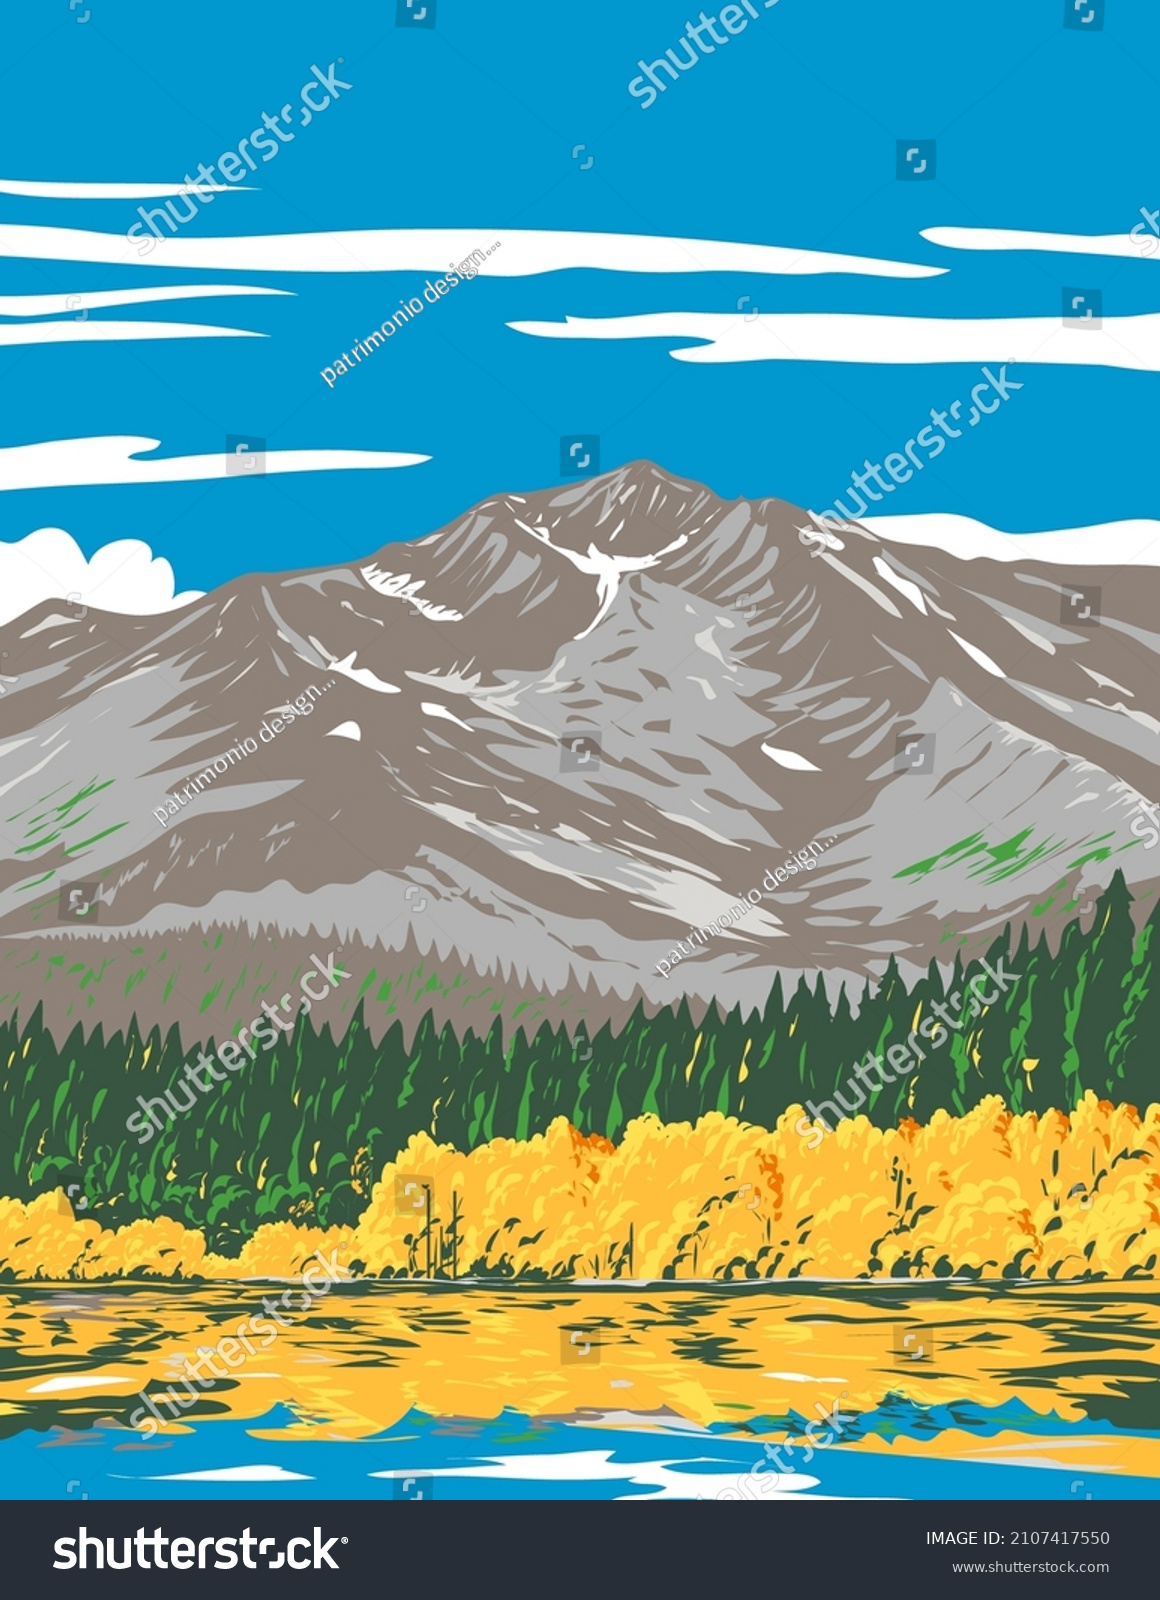 SVG of Fallen Leaf Lake in Fall Viewed from Taylor Creek Trail California USA WPA Poster Art svg